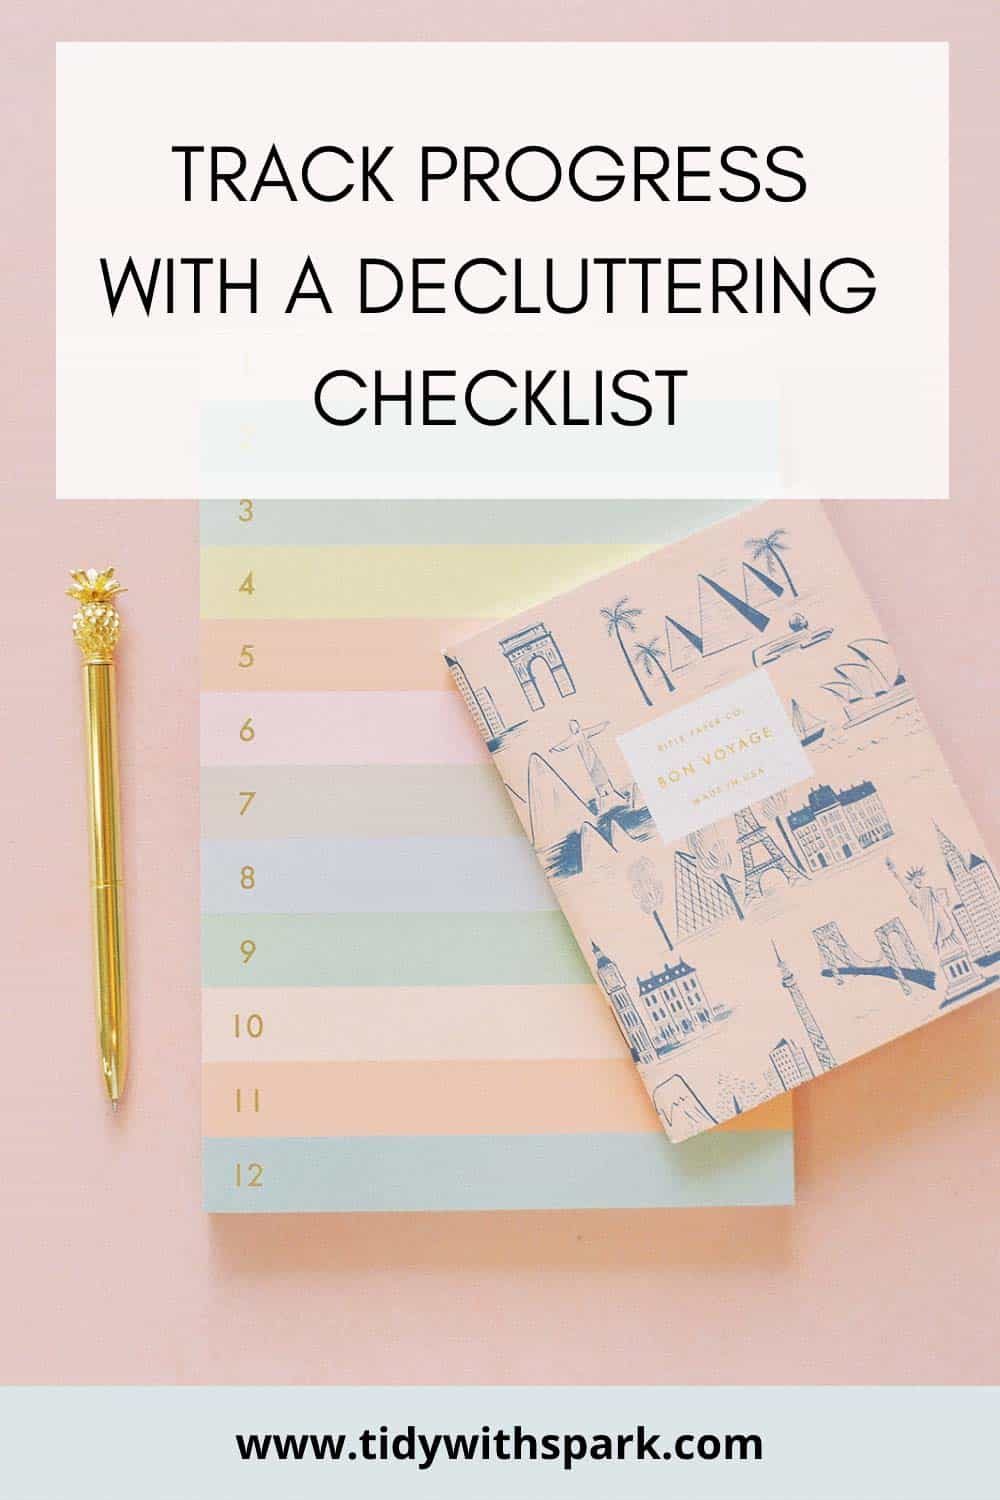 flatlay photo of calendar and checklist with pen and text overlay of "track progress with a decluttering checklist" Tidy with spark free printable decluttering checklist pdf